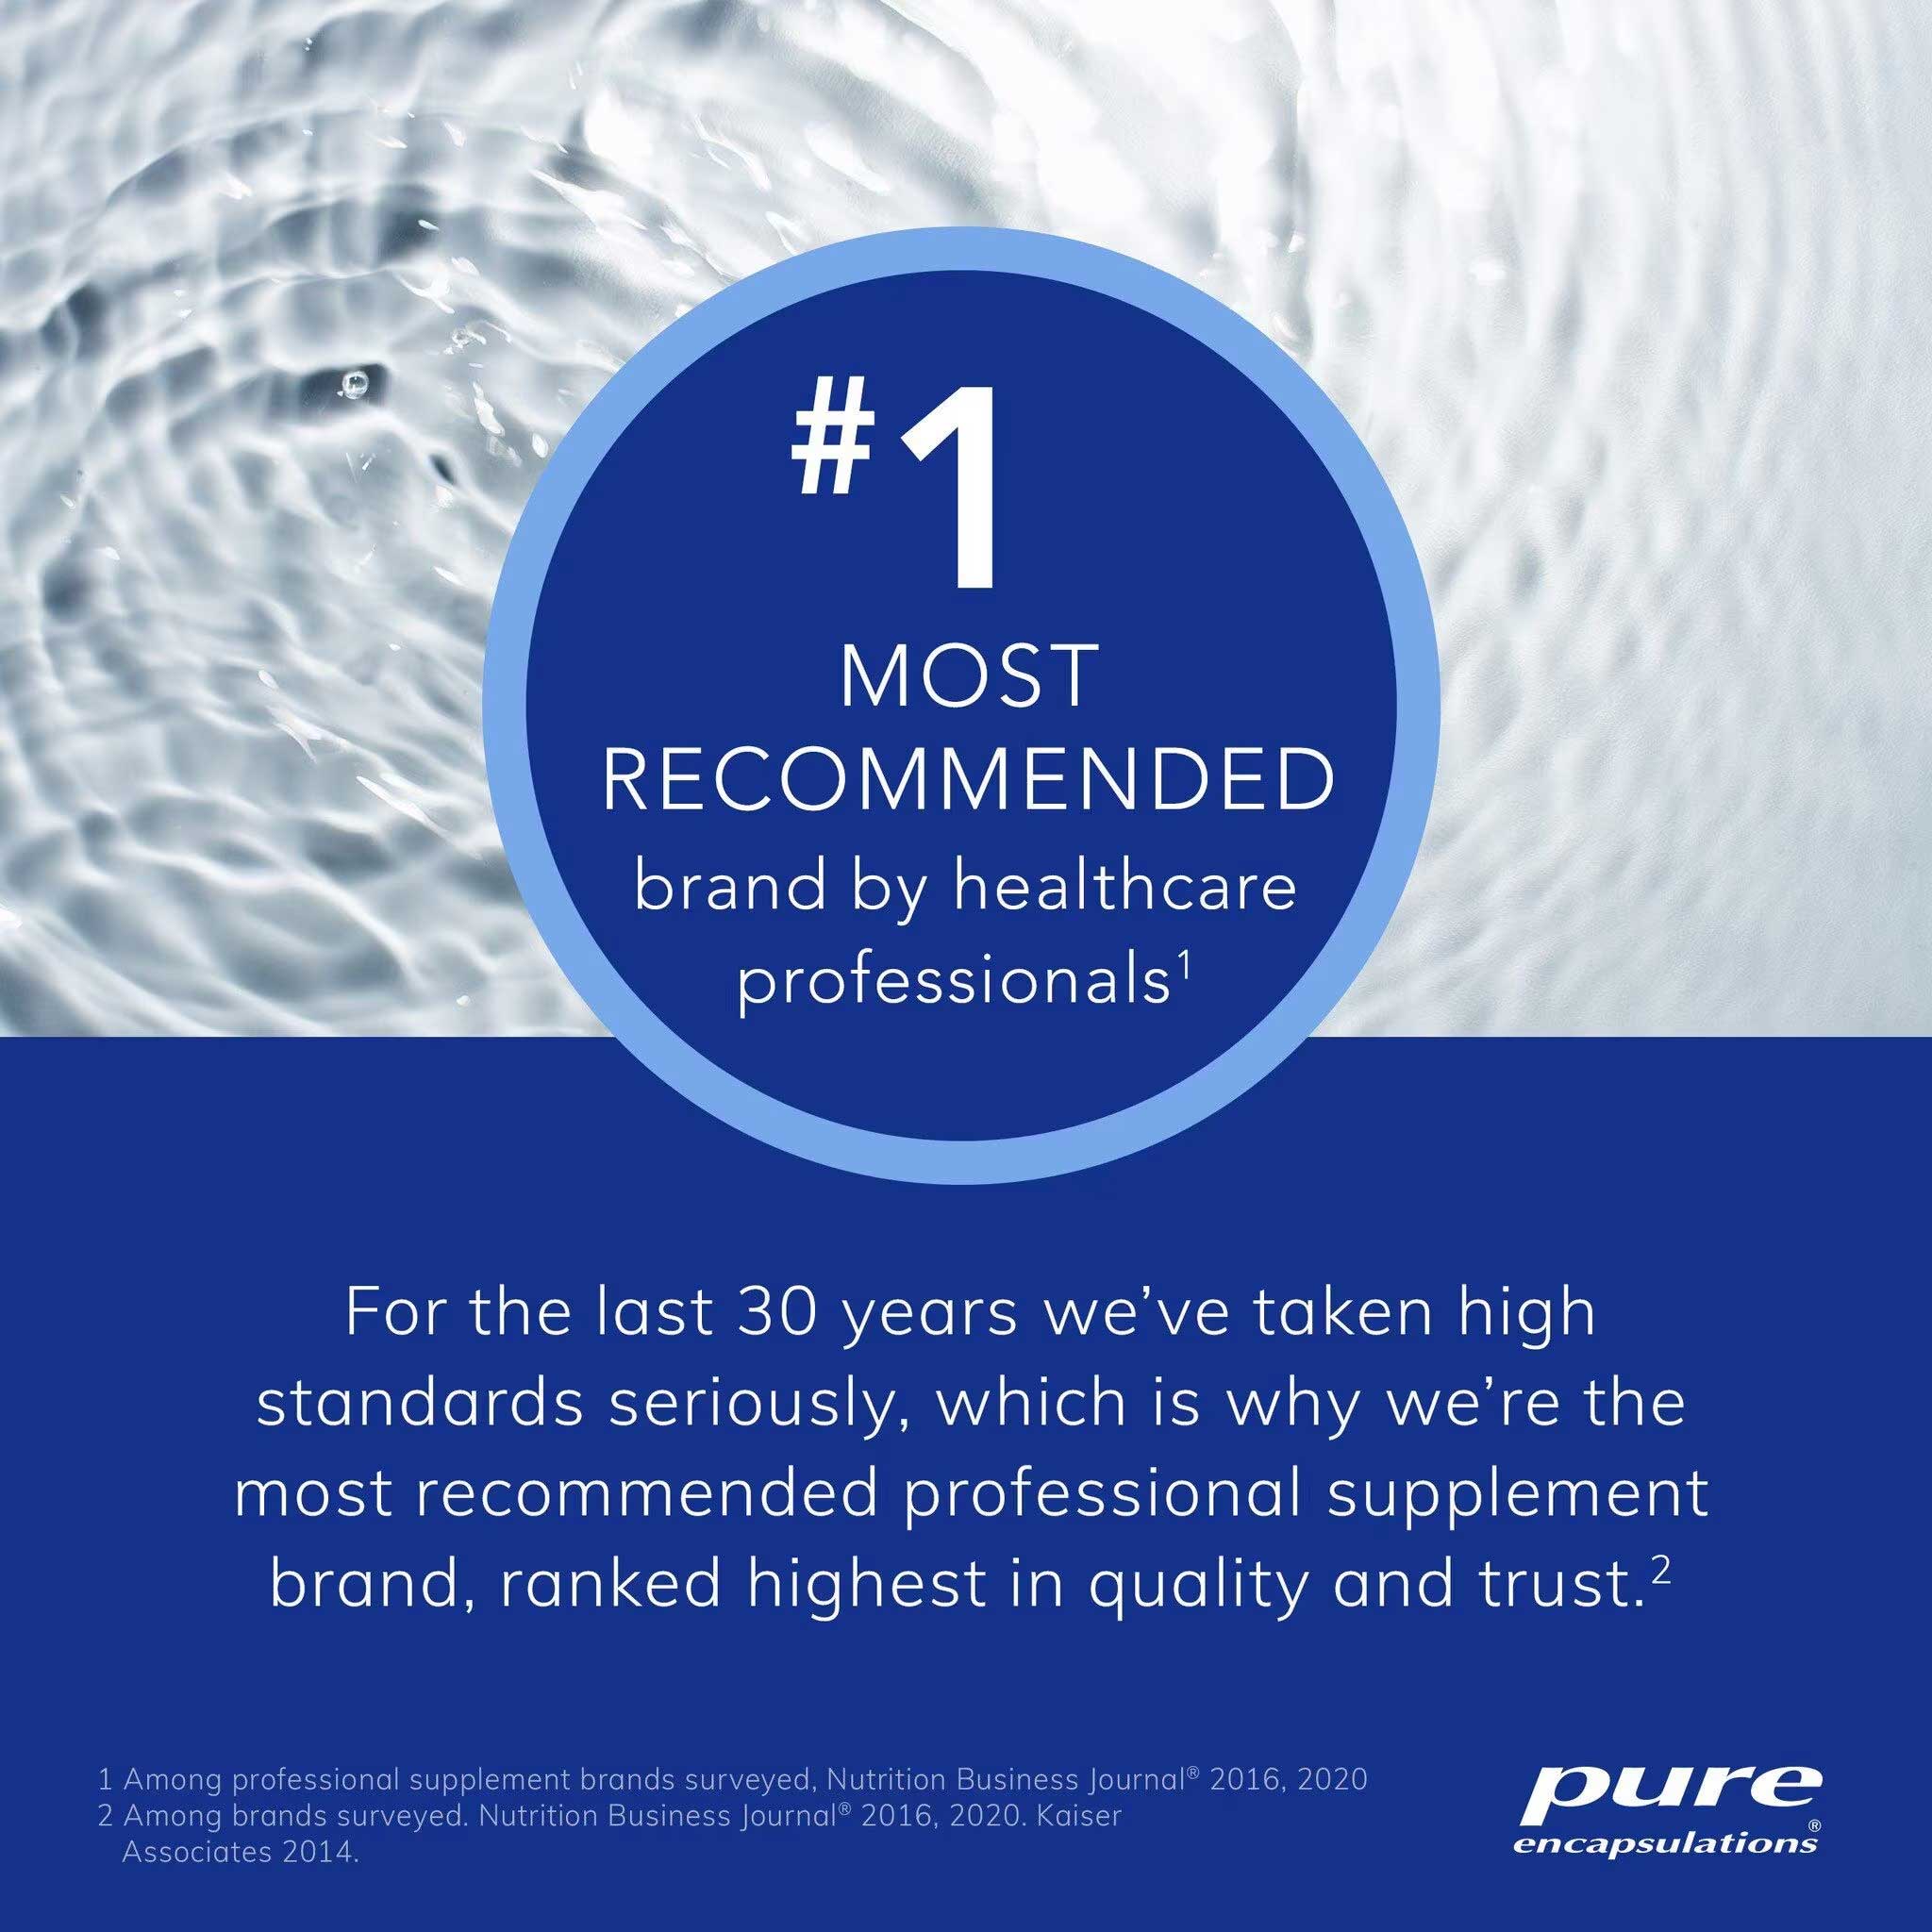 Pure Encapsulations PureProbiotic Allergen-Free Most Recommended Brand